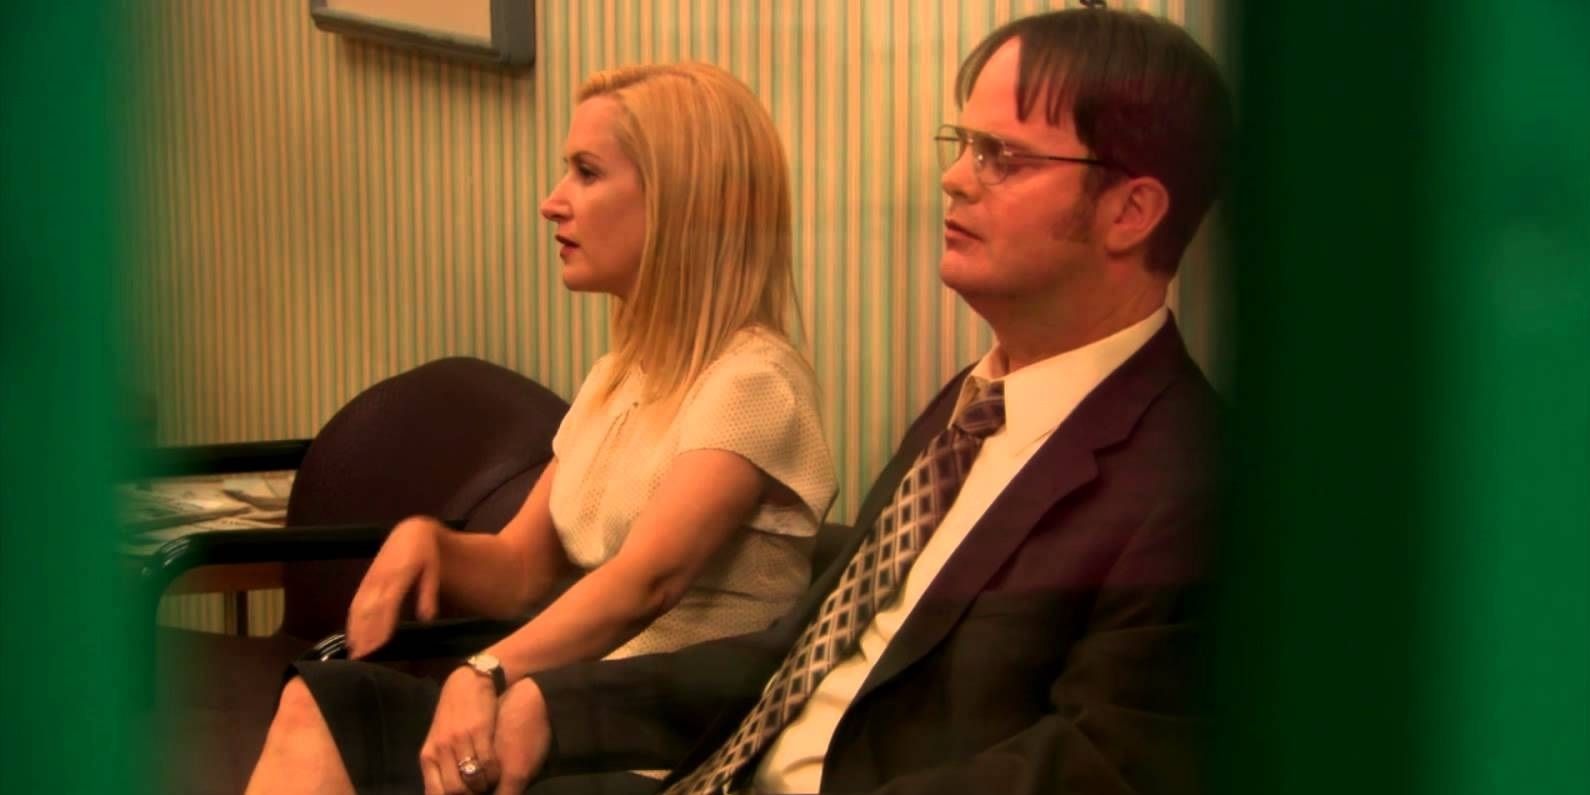 Dwight and Angela - TV Couples That Shouldn't Have Worked